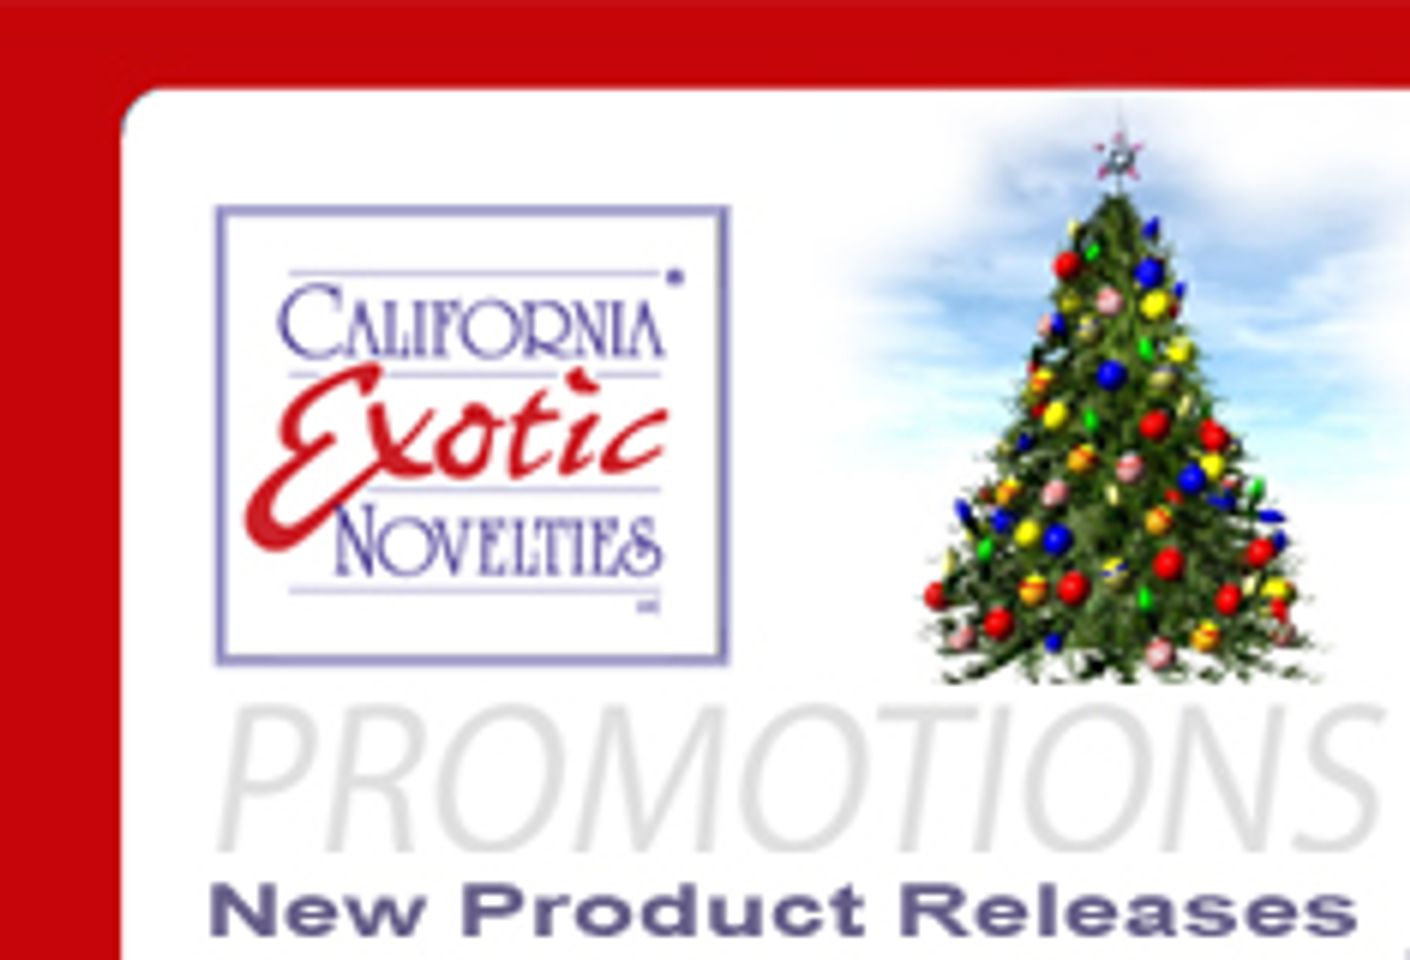 Cal Exotics Holiday Schedule